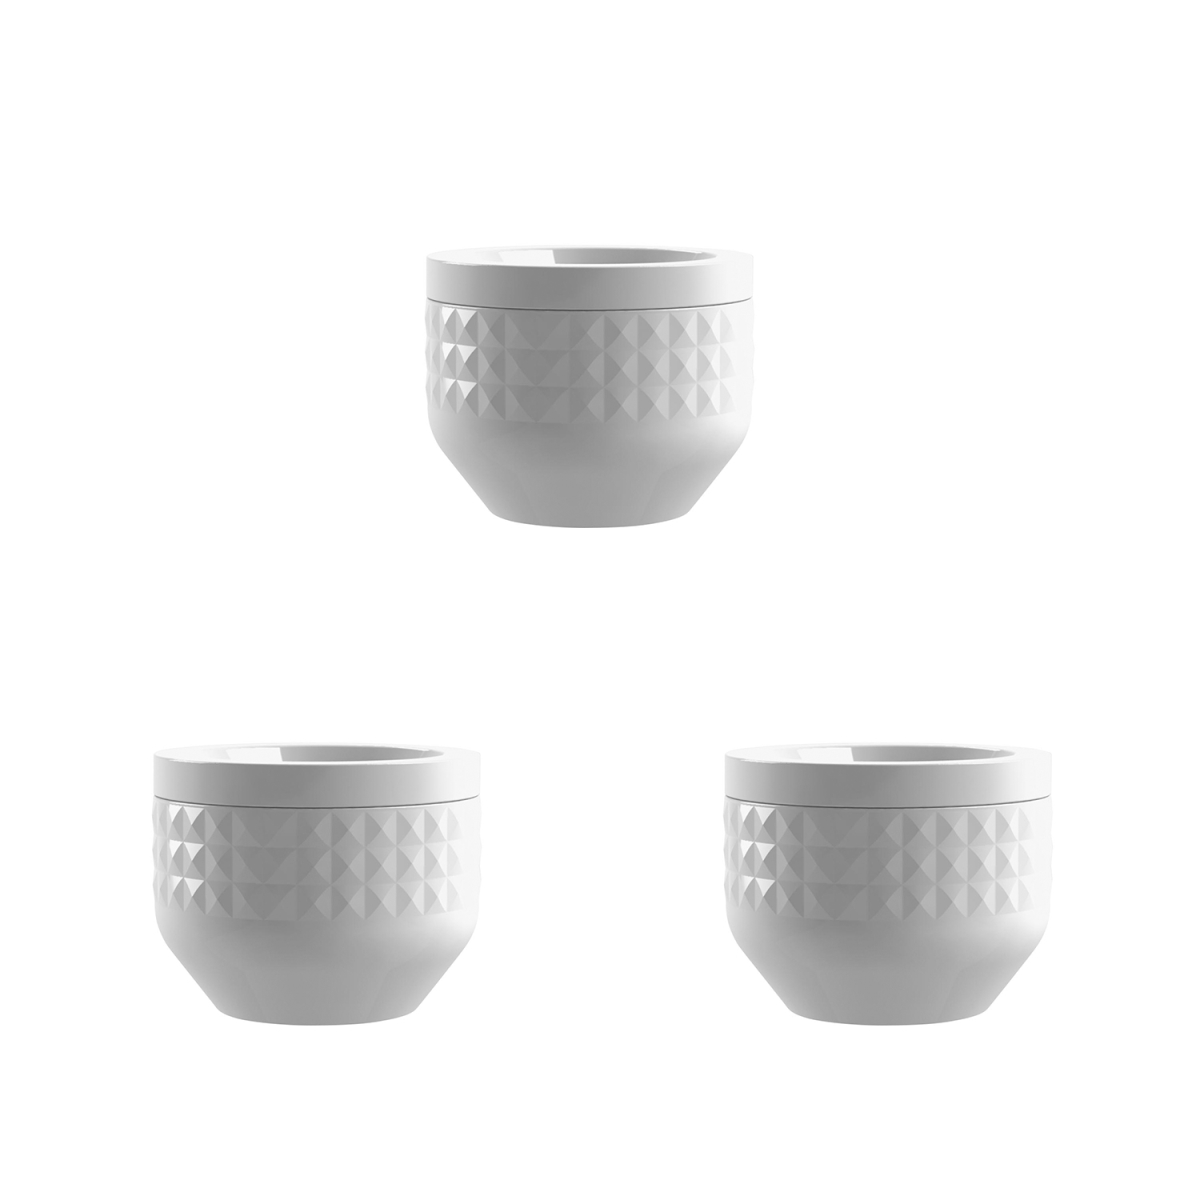 Tarhong CPDMSJ1040CW Diamond Stoneware Canister - Stoneware - Small - Set of 3